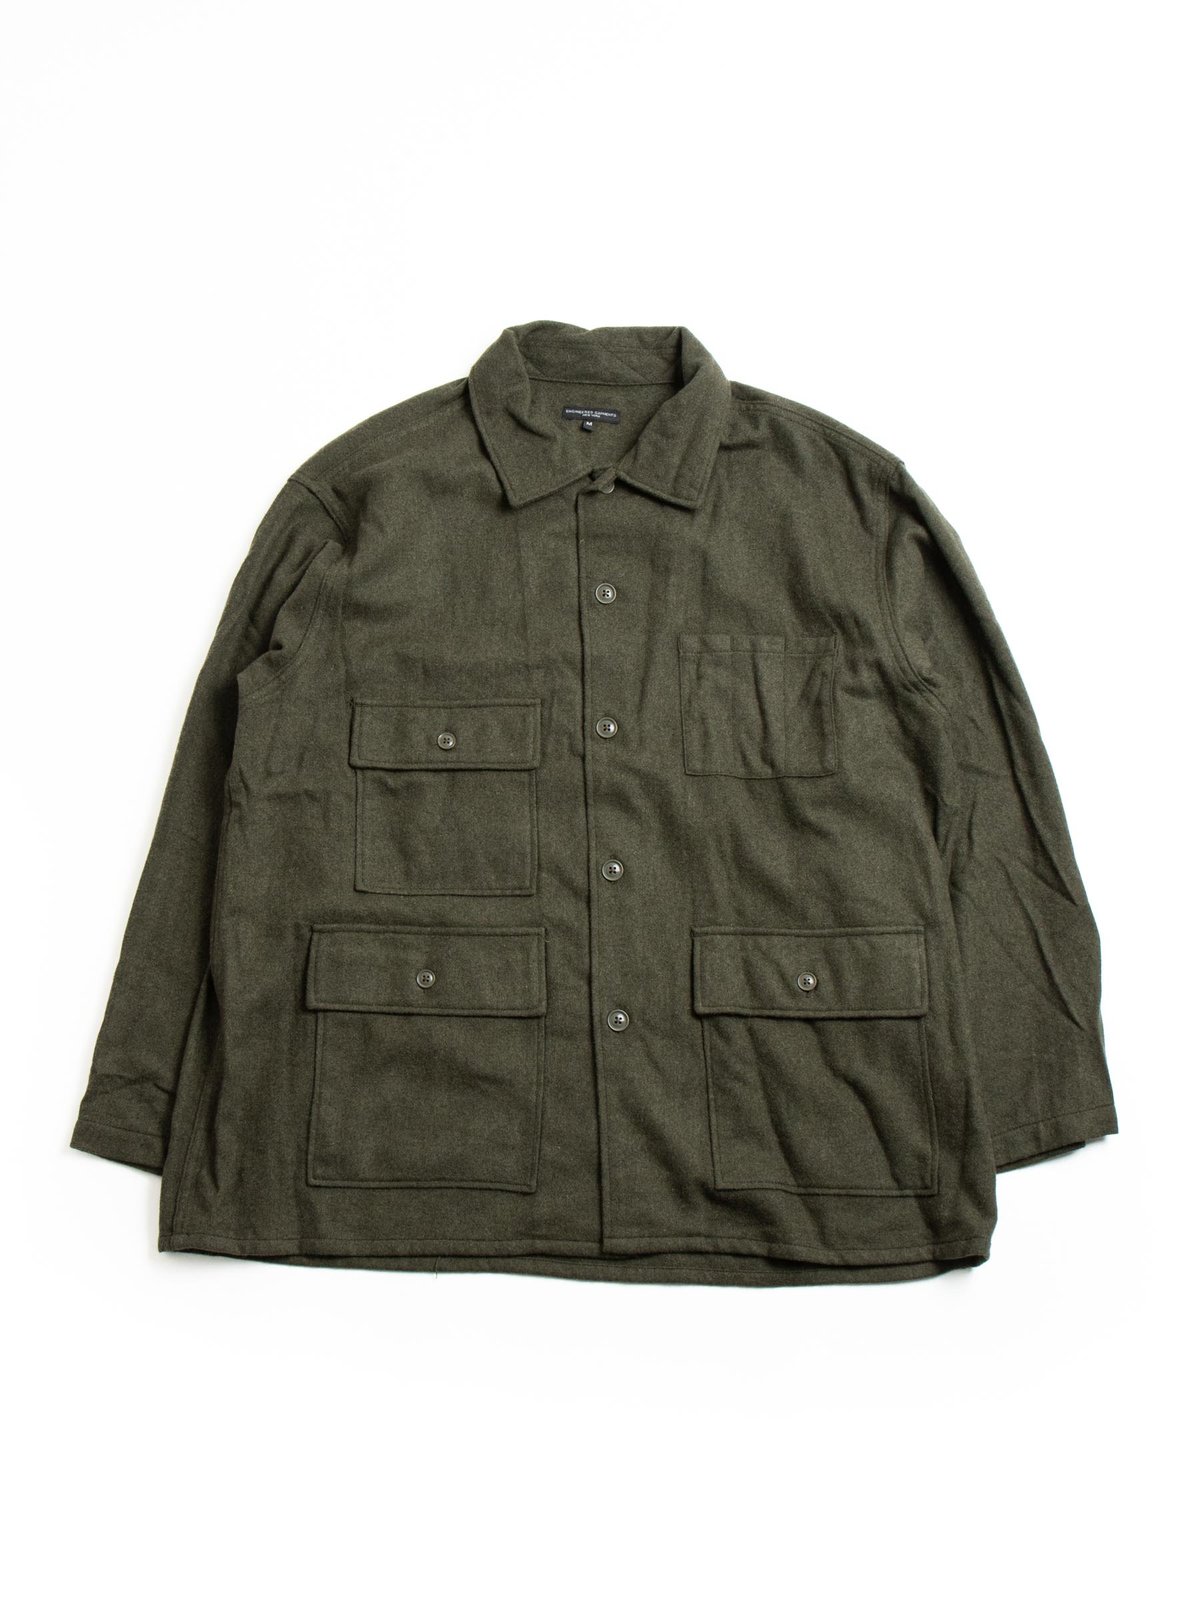 BA SHIRT JACKET OLIVE SOLID POLY WOOL FLANNEL by Engineered